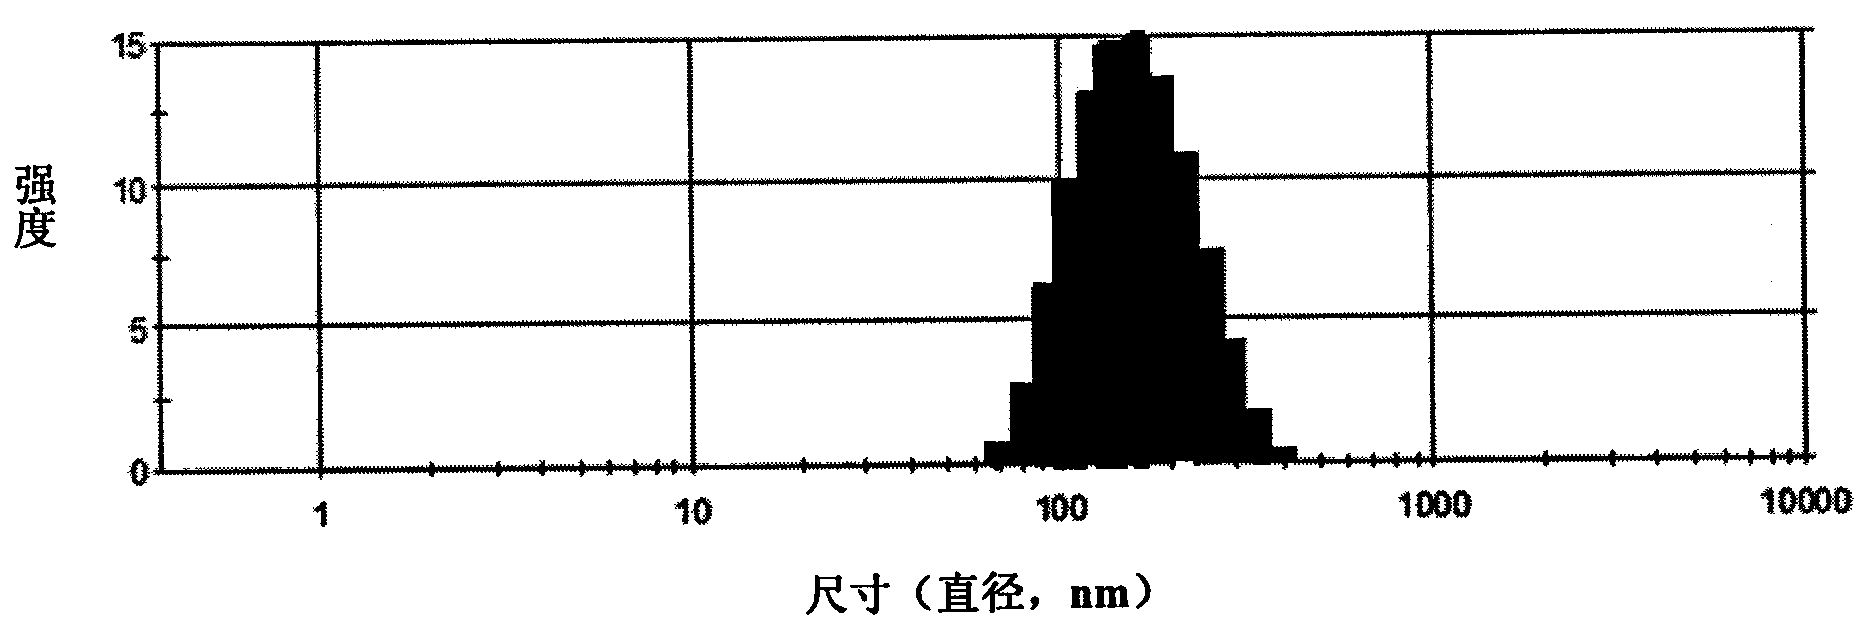 Camptothecin, self-emulsifying medicine precursor of derivative thereof and application thereof